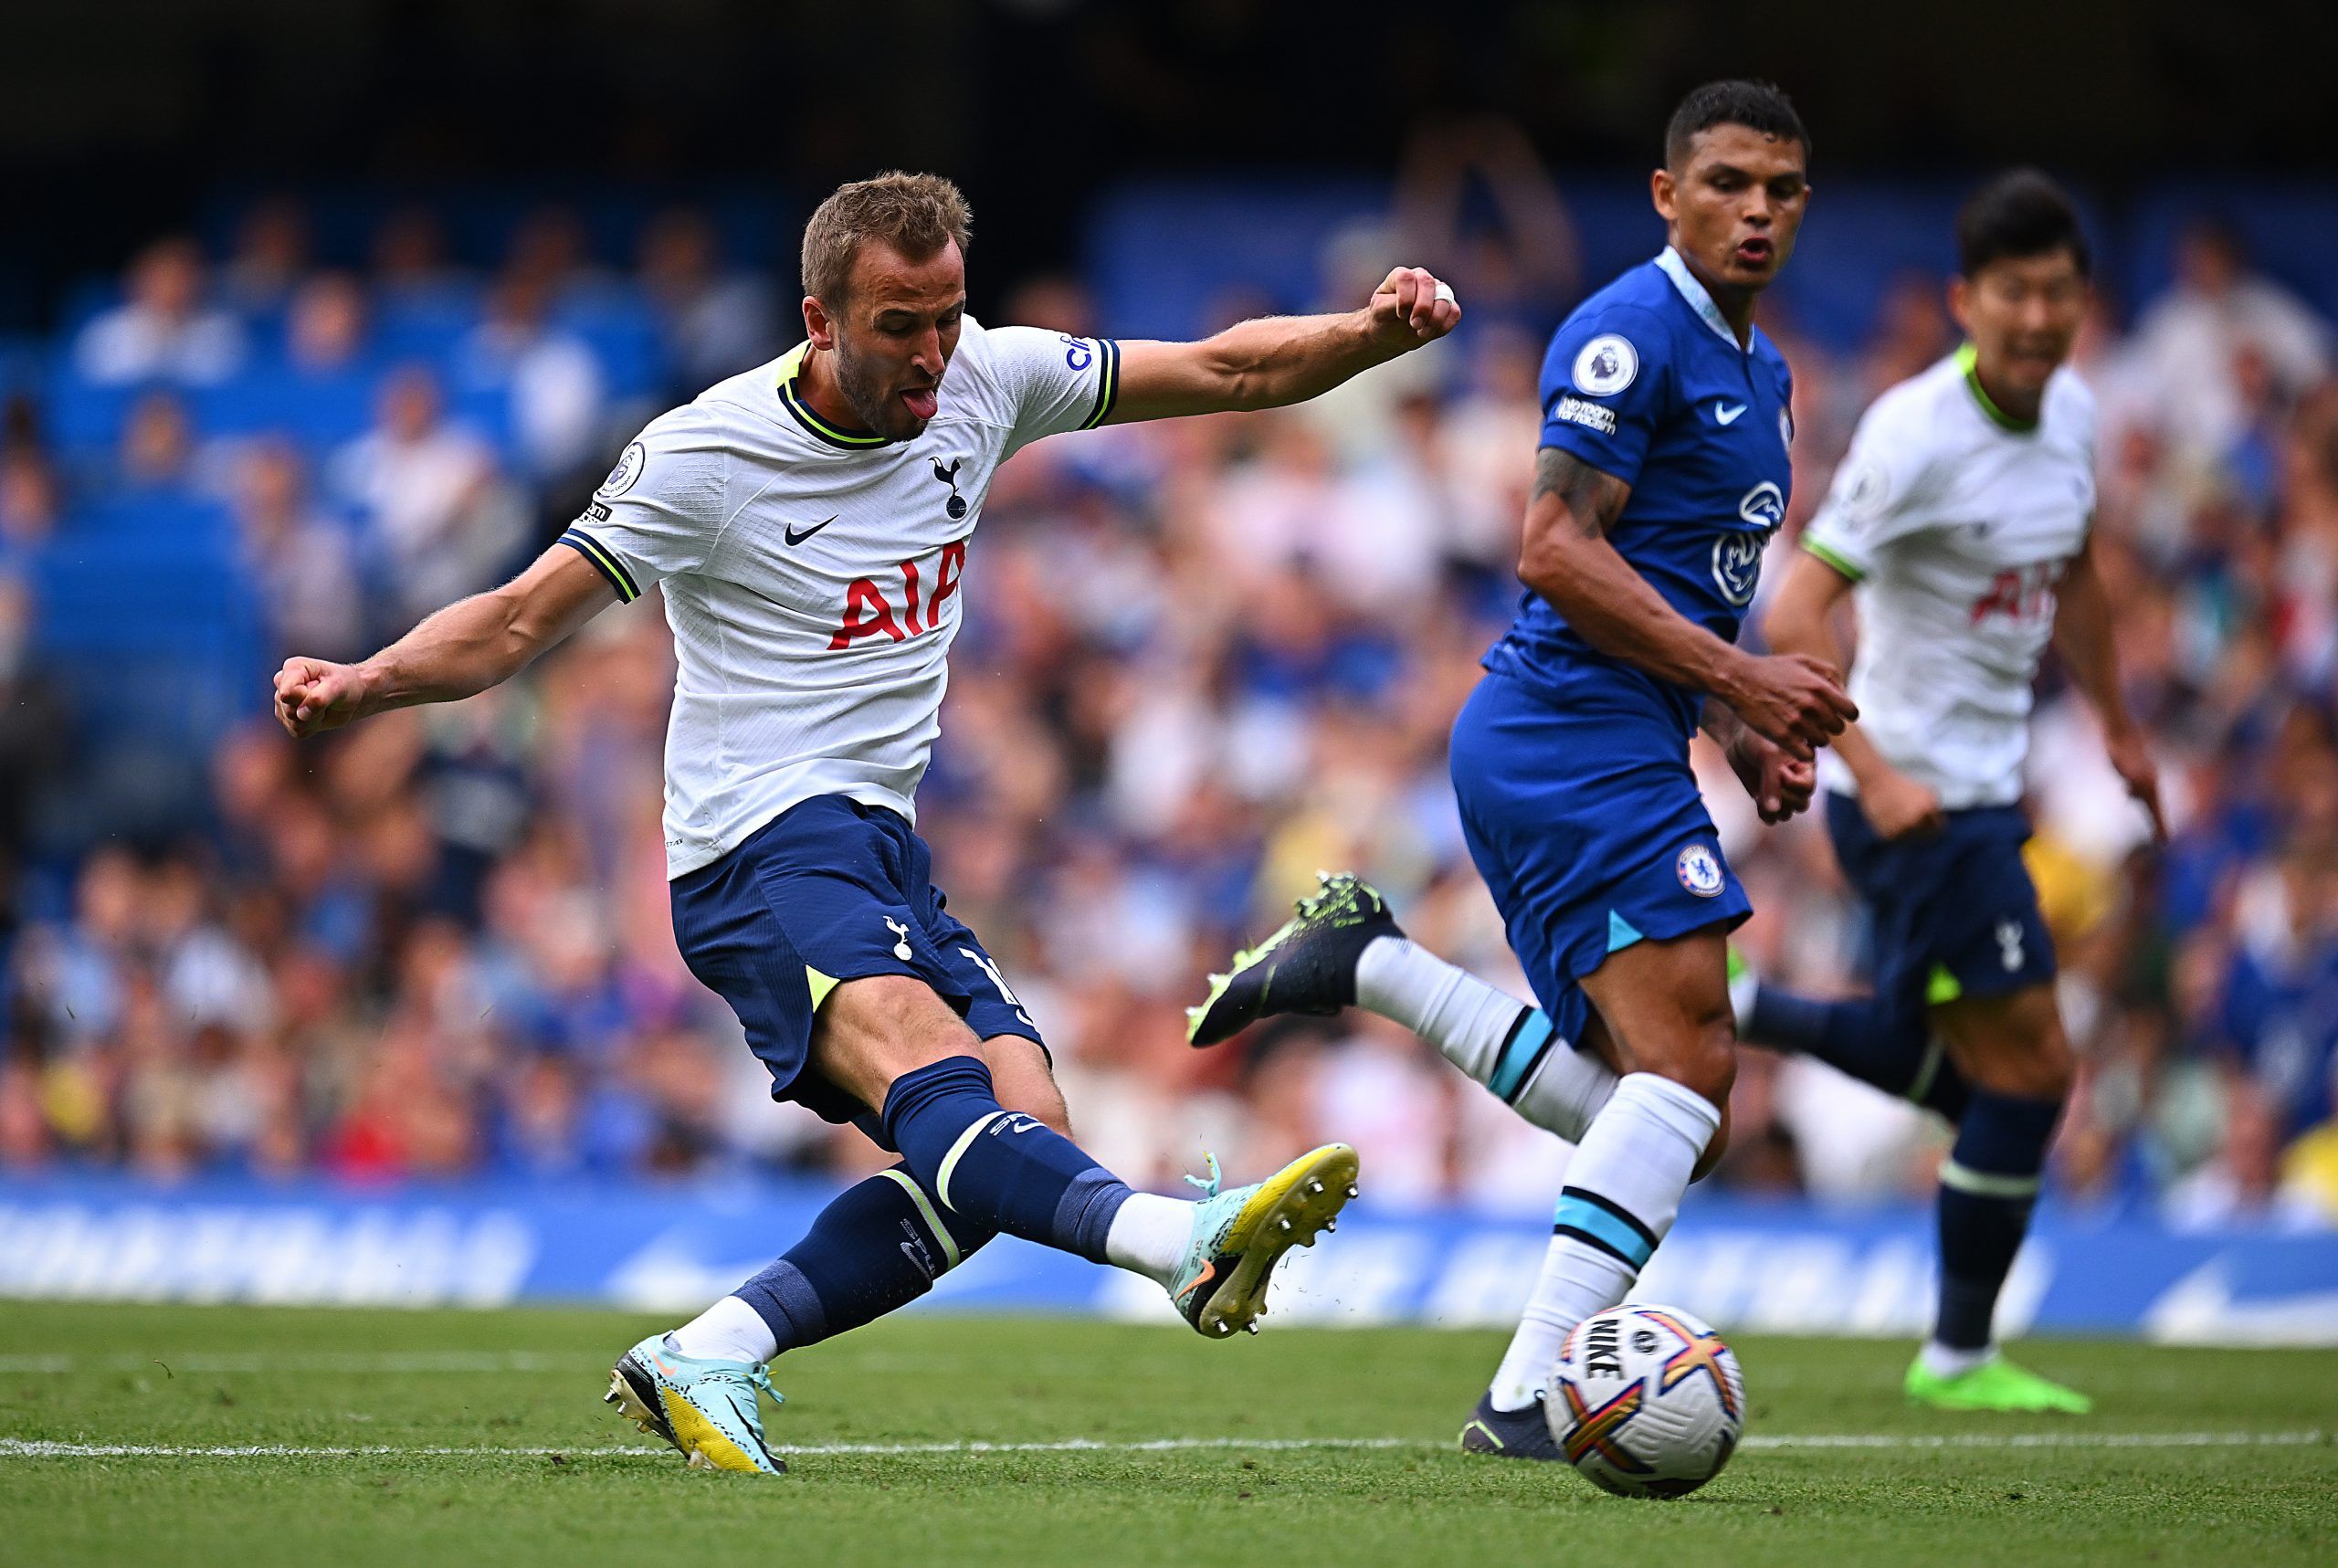 LONDON, ENGLAND - AUGUST 14: Harry Kane of Tottenham Hotspur shoots and misses during the Premier League match between Chelsea FC and Tottenham Hotspur at Stamford Bridge on August 14, 2022 in London, England. (Photo by Clive Mason/Getty Images)